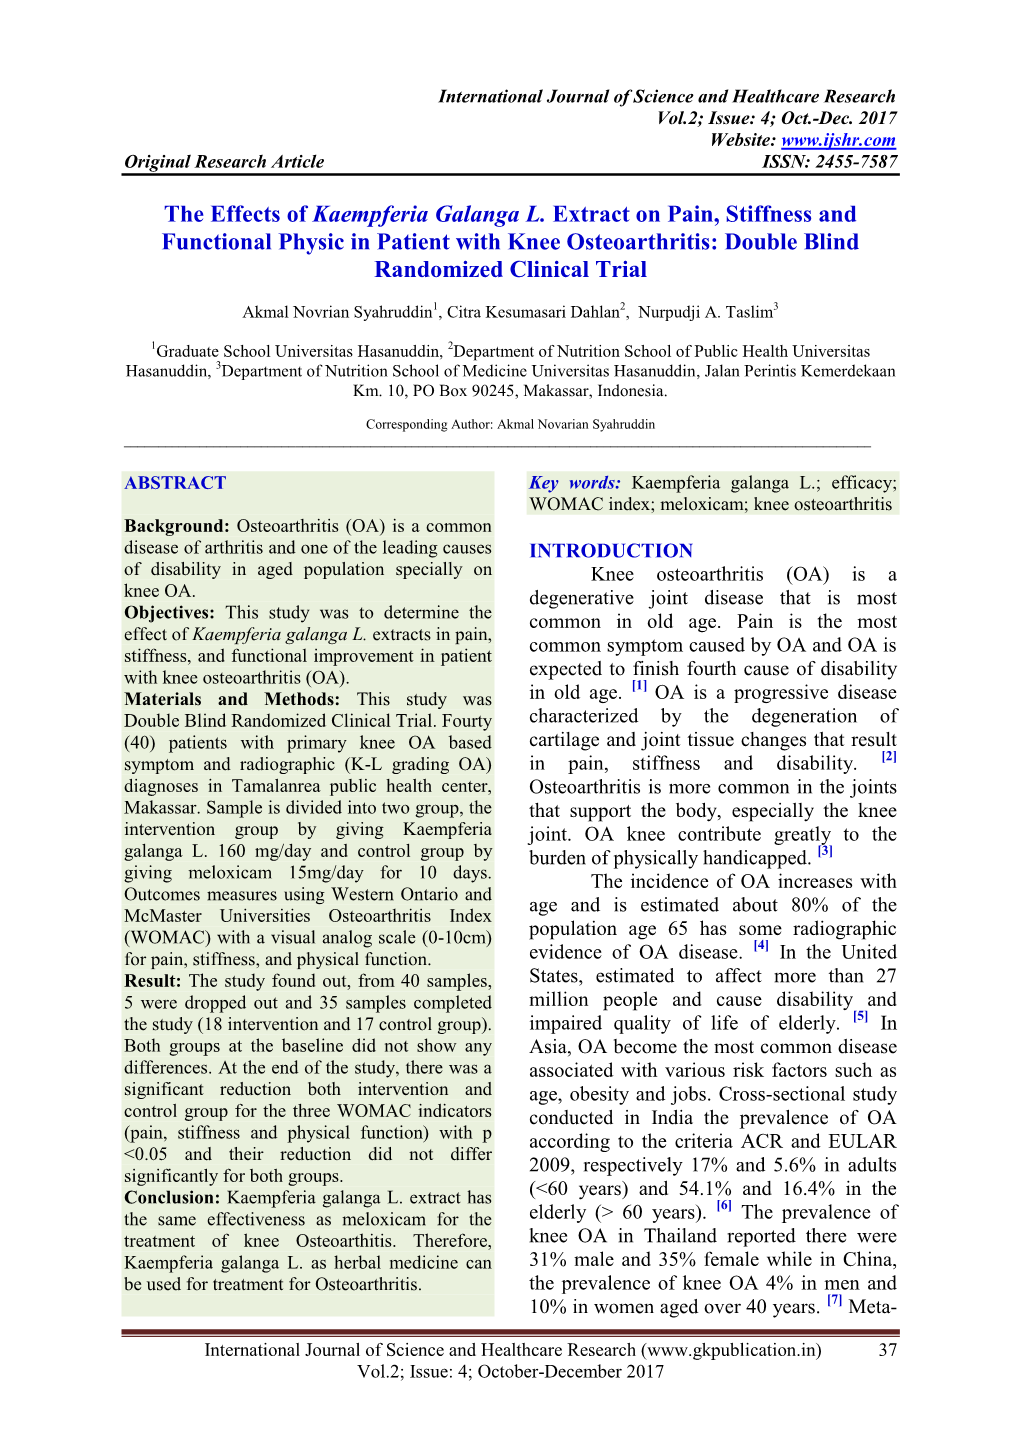 The Effects of Kaempferia Galanga L. Extract on Pain, Stiffness and Functional Physic in Patient with Knee Osteoarthritis: Double Blind Randomized Clinical Trial